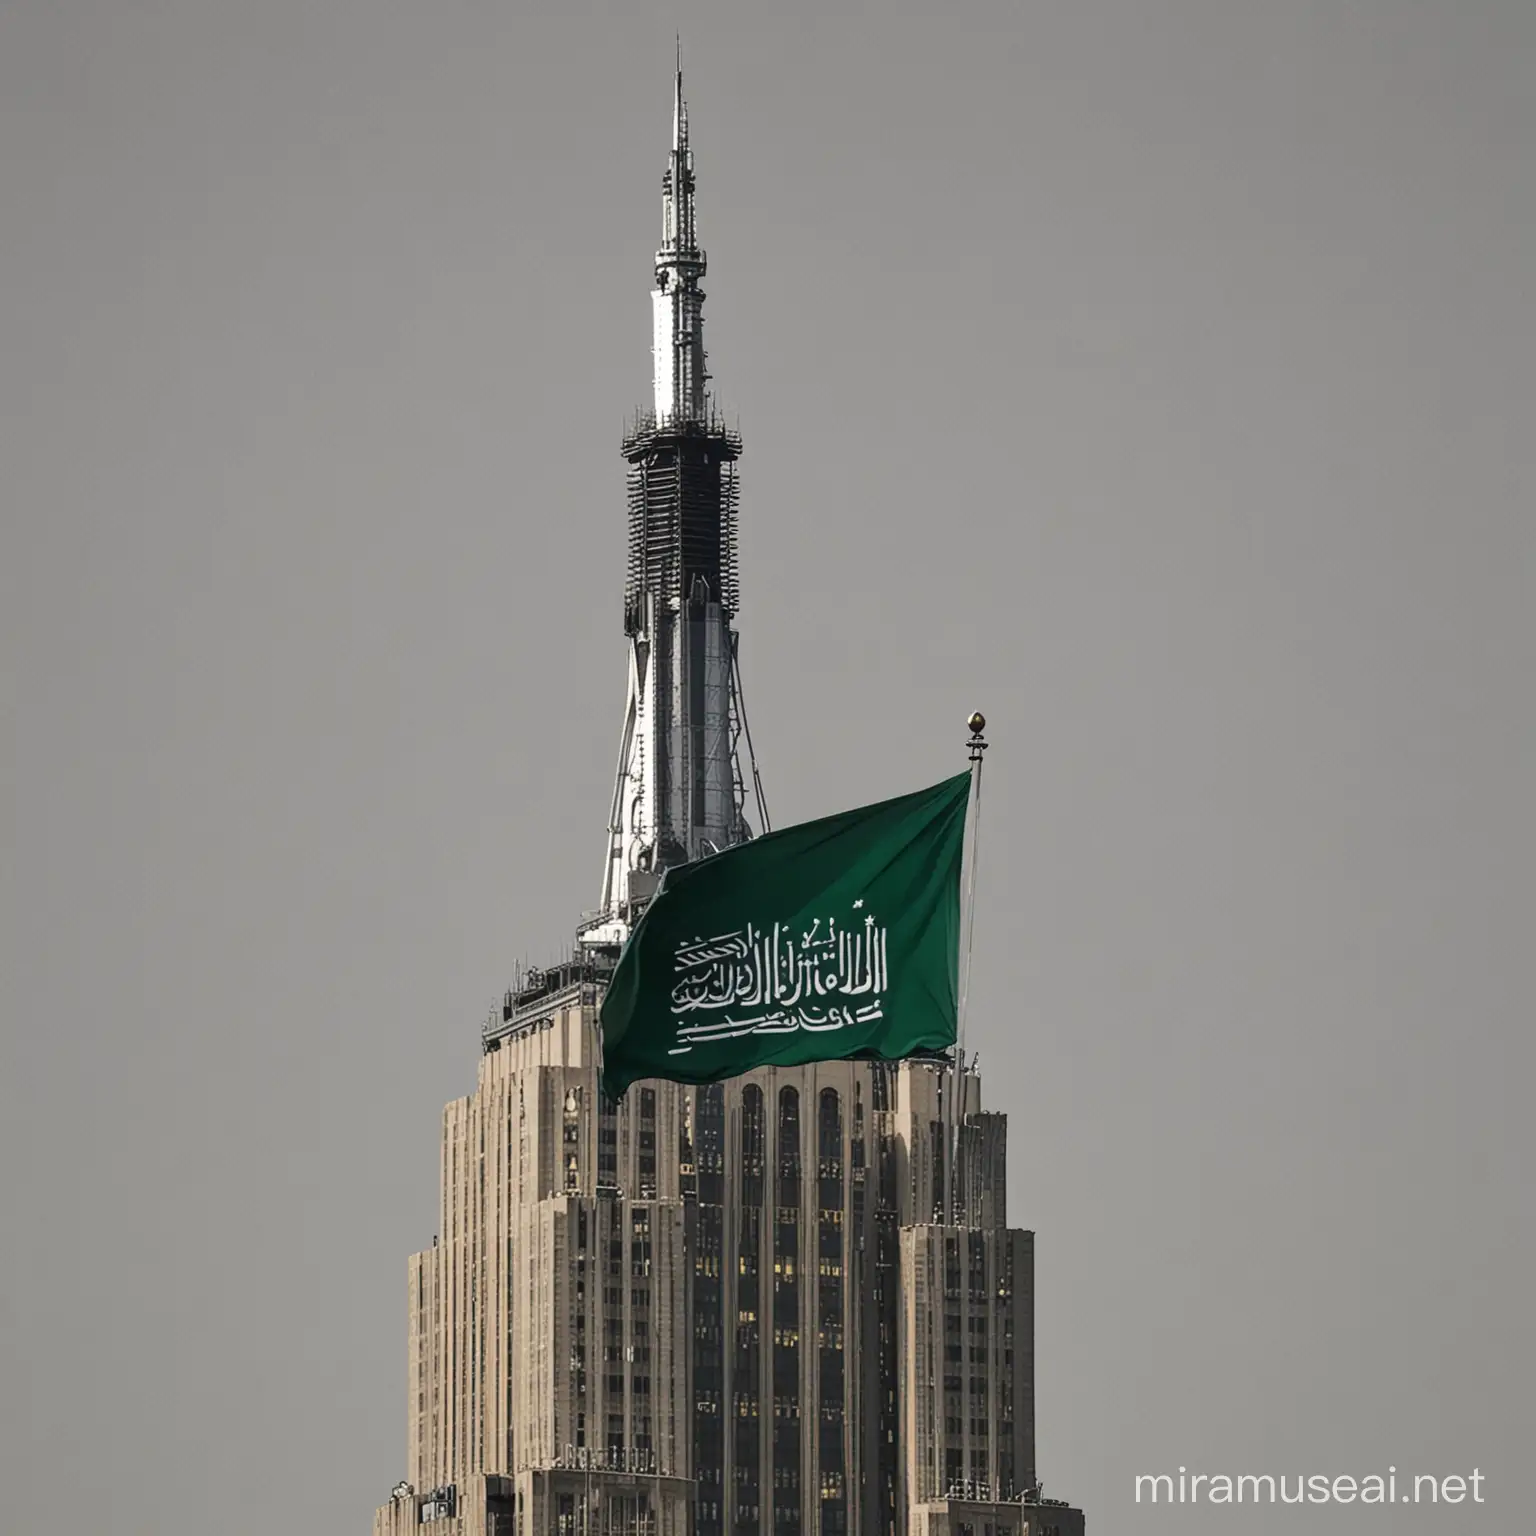 Saudi Flag Flying Atop Empire State Building